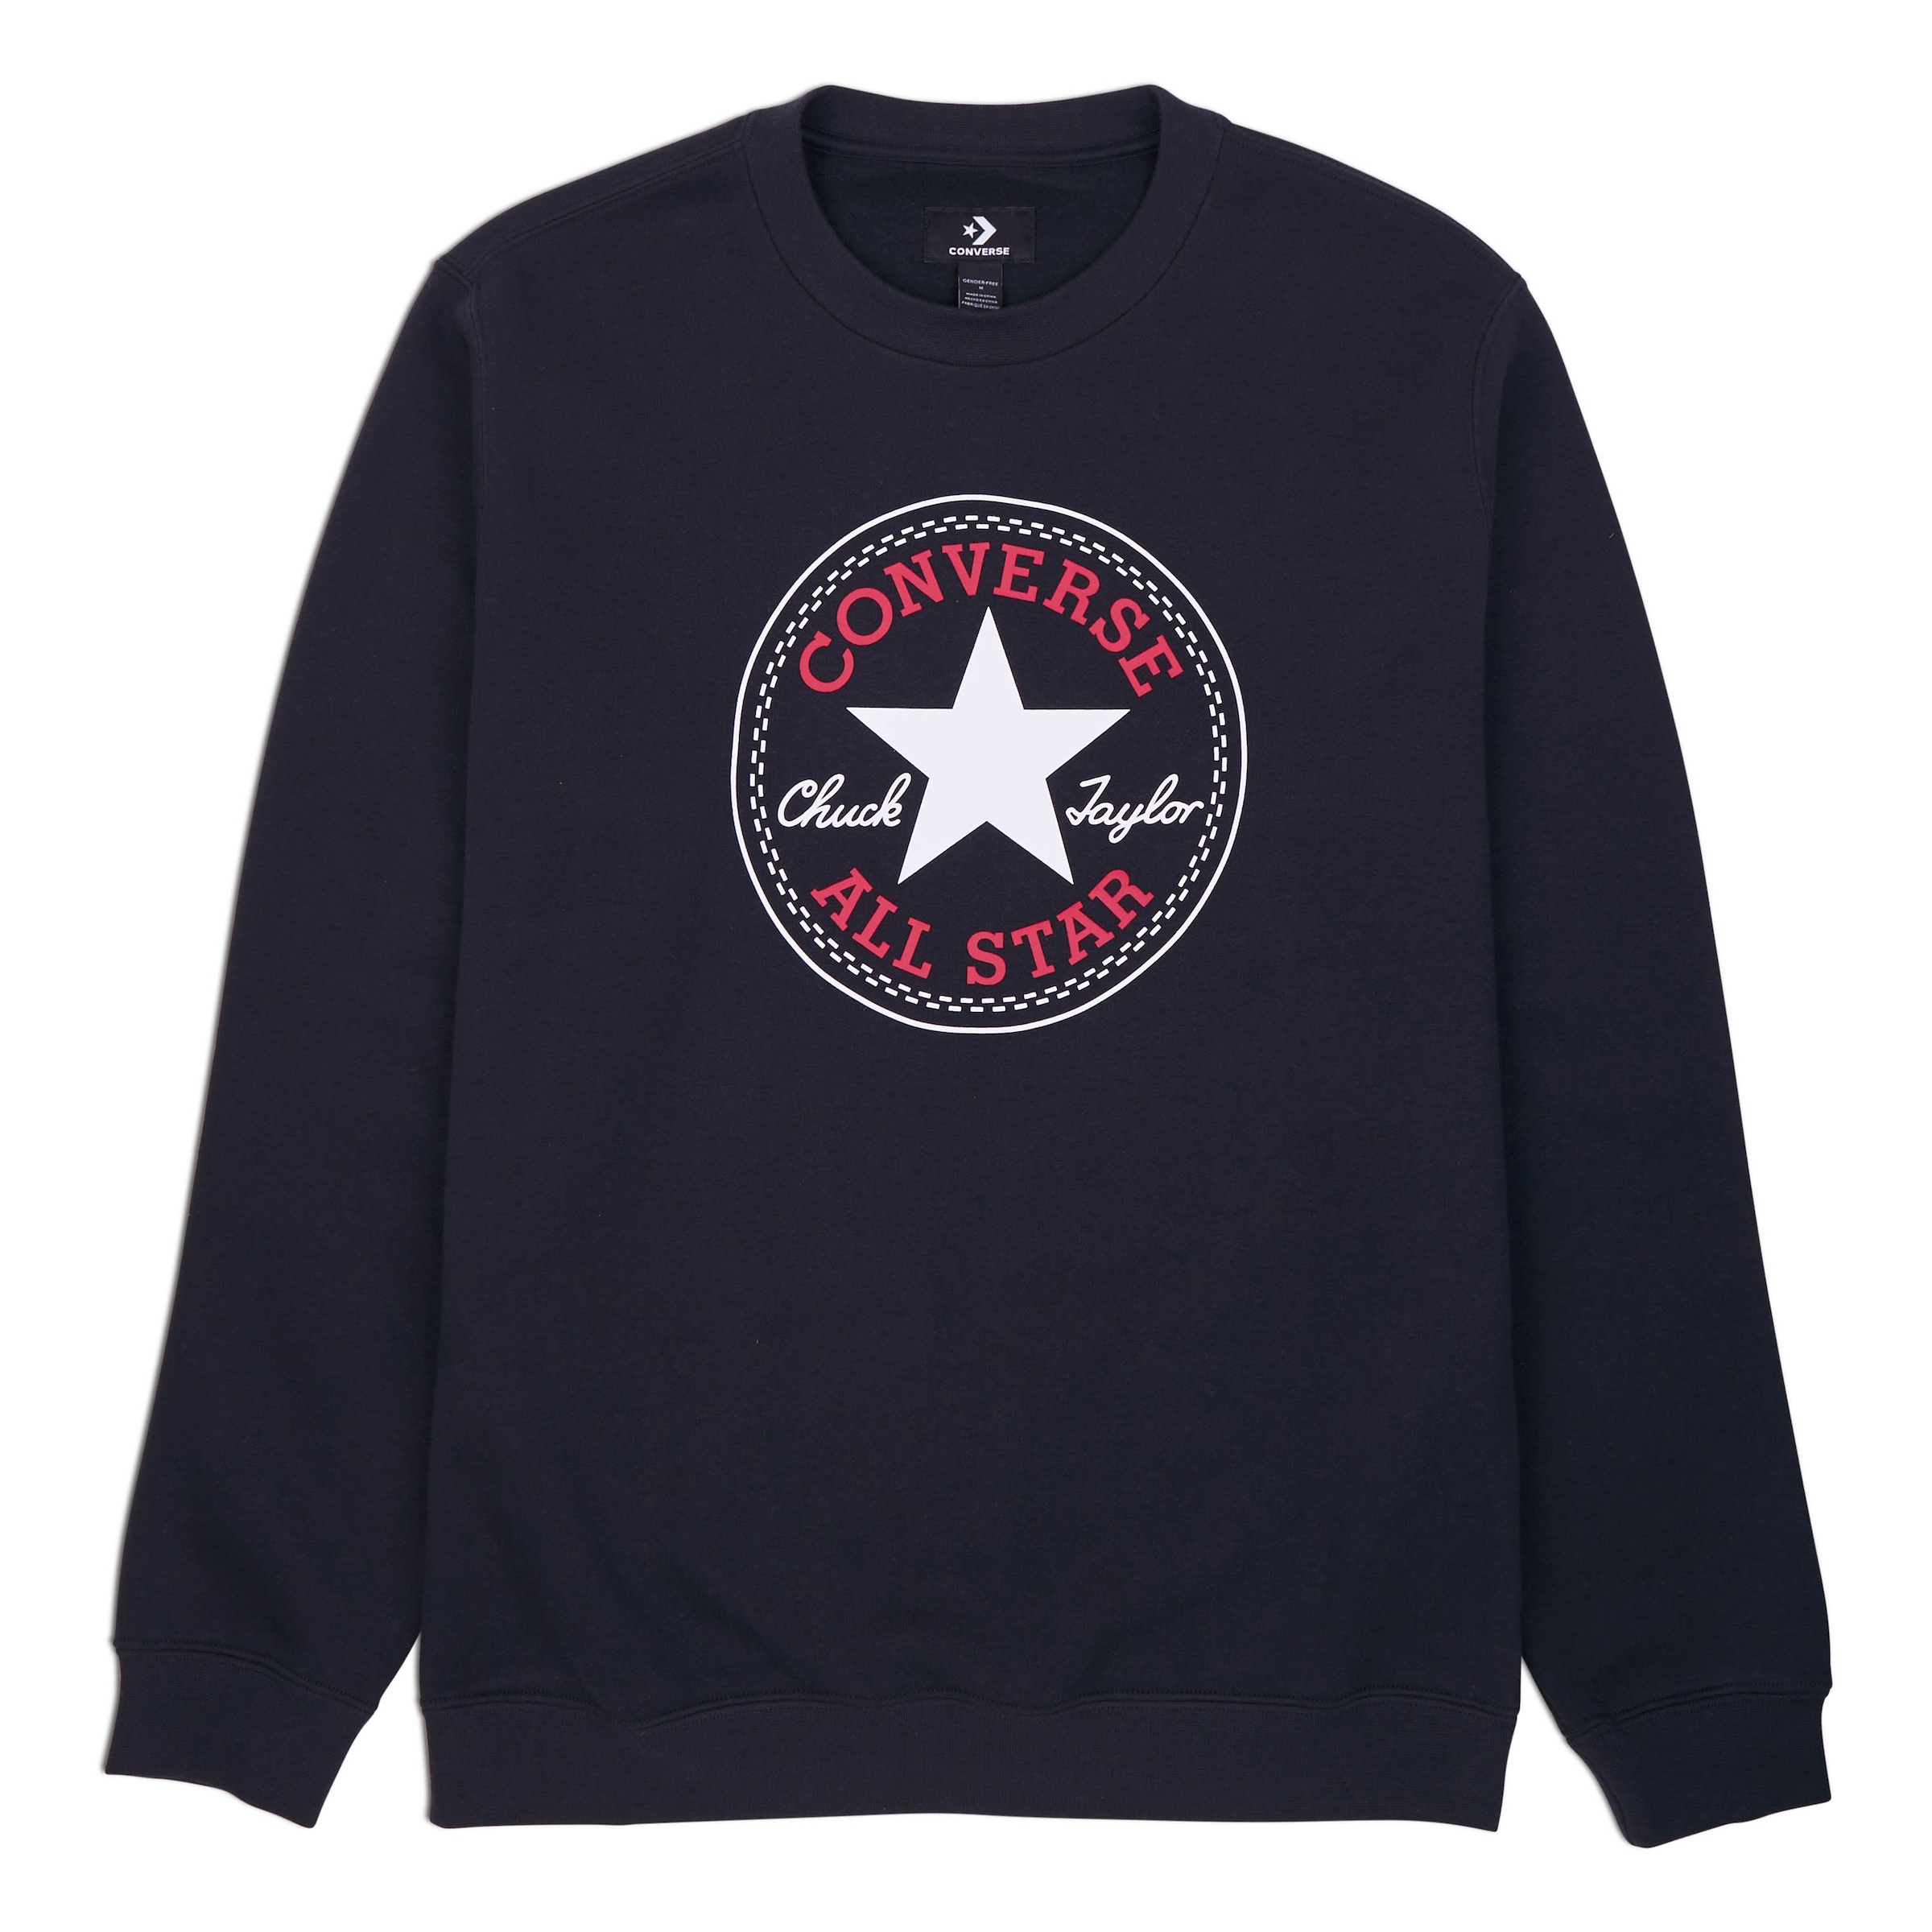 Converse Sweatshirt »UNISEX ALL STAR BACK« PATCH BRUSHED bei